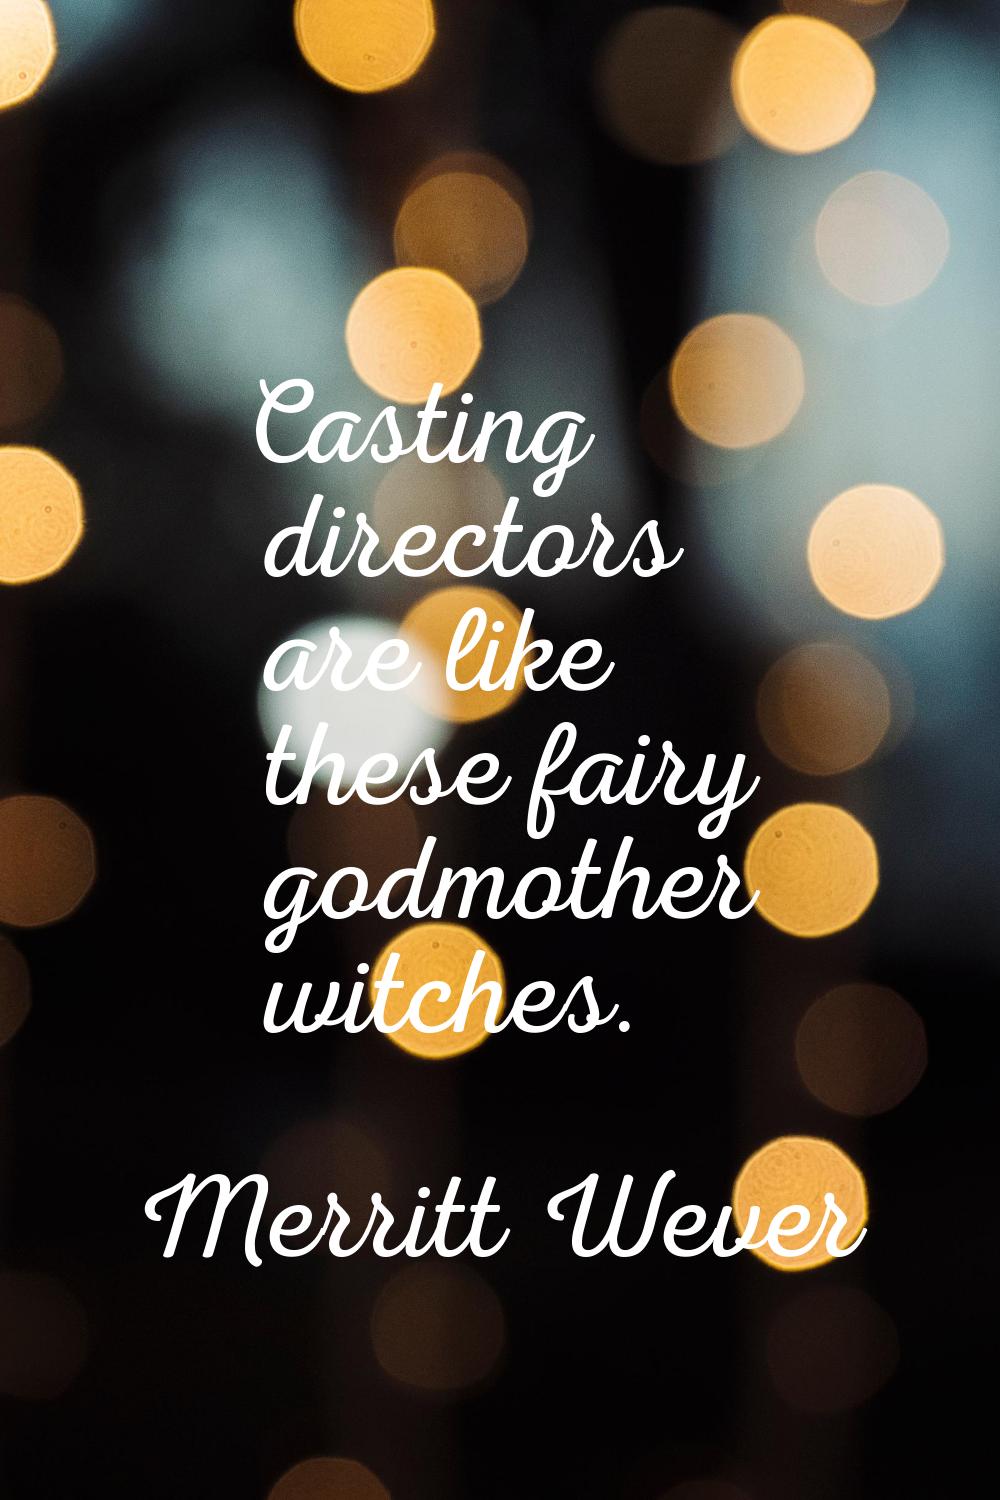 Casting directors are like these fairy godmother witches.